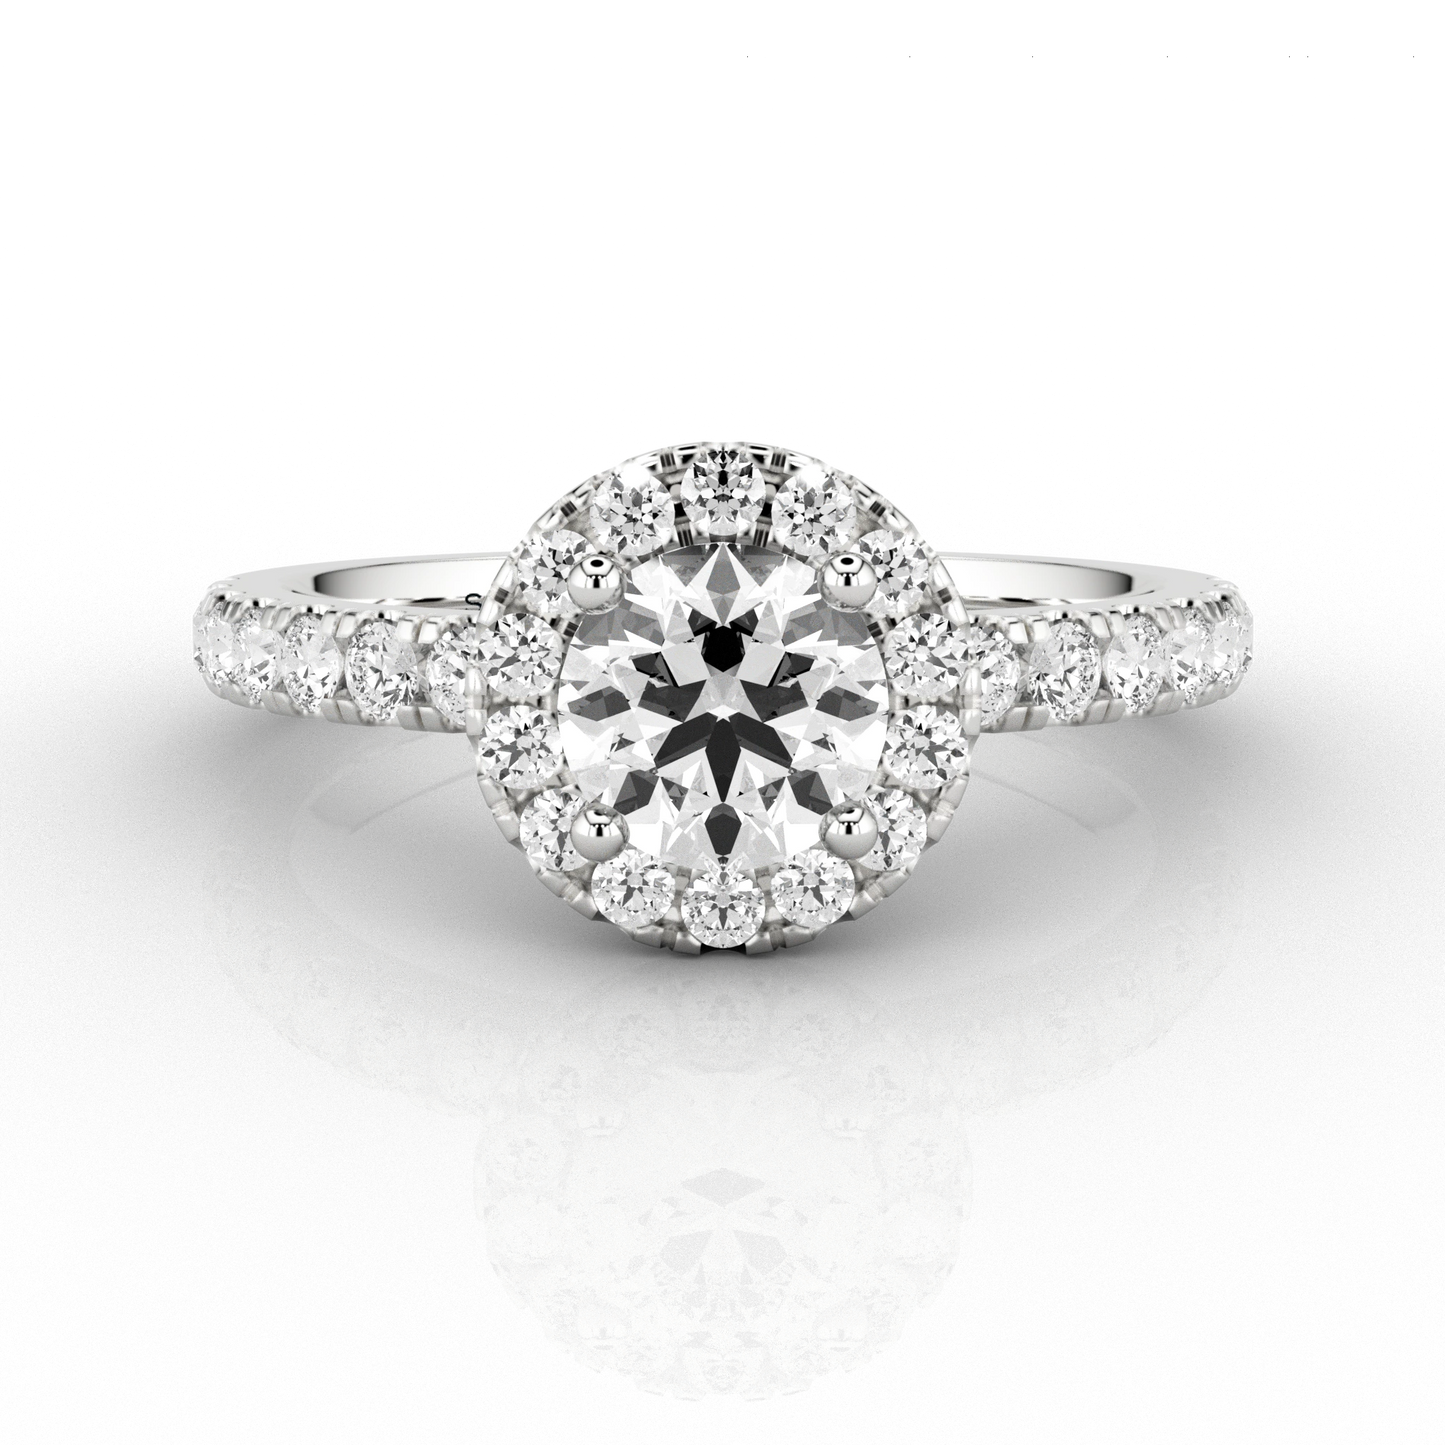 Halo Set 1ct Engagement Ring with Micro-Pave band in Platinum